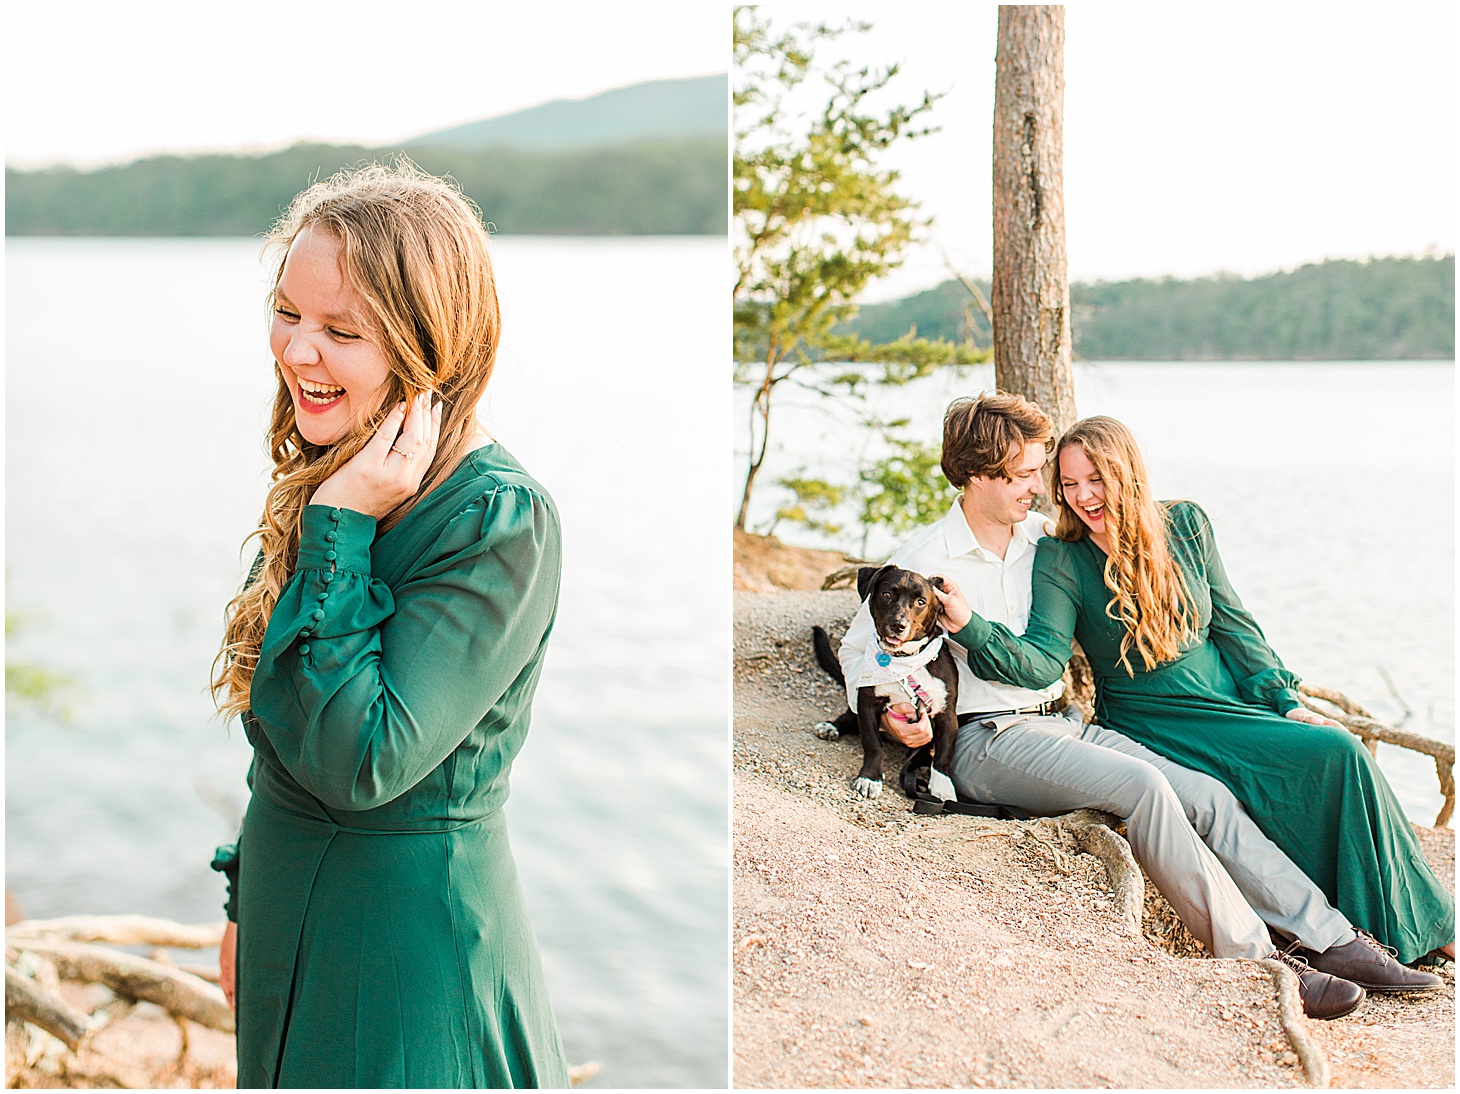 carvinscoveengagementsession_roanokeengagementsession_carvinscove_virginiawedding_virginiaweddingphotographer_vaweddingphotographer_photo_0044.jpg